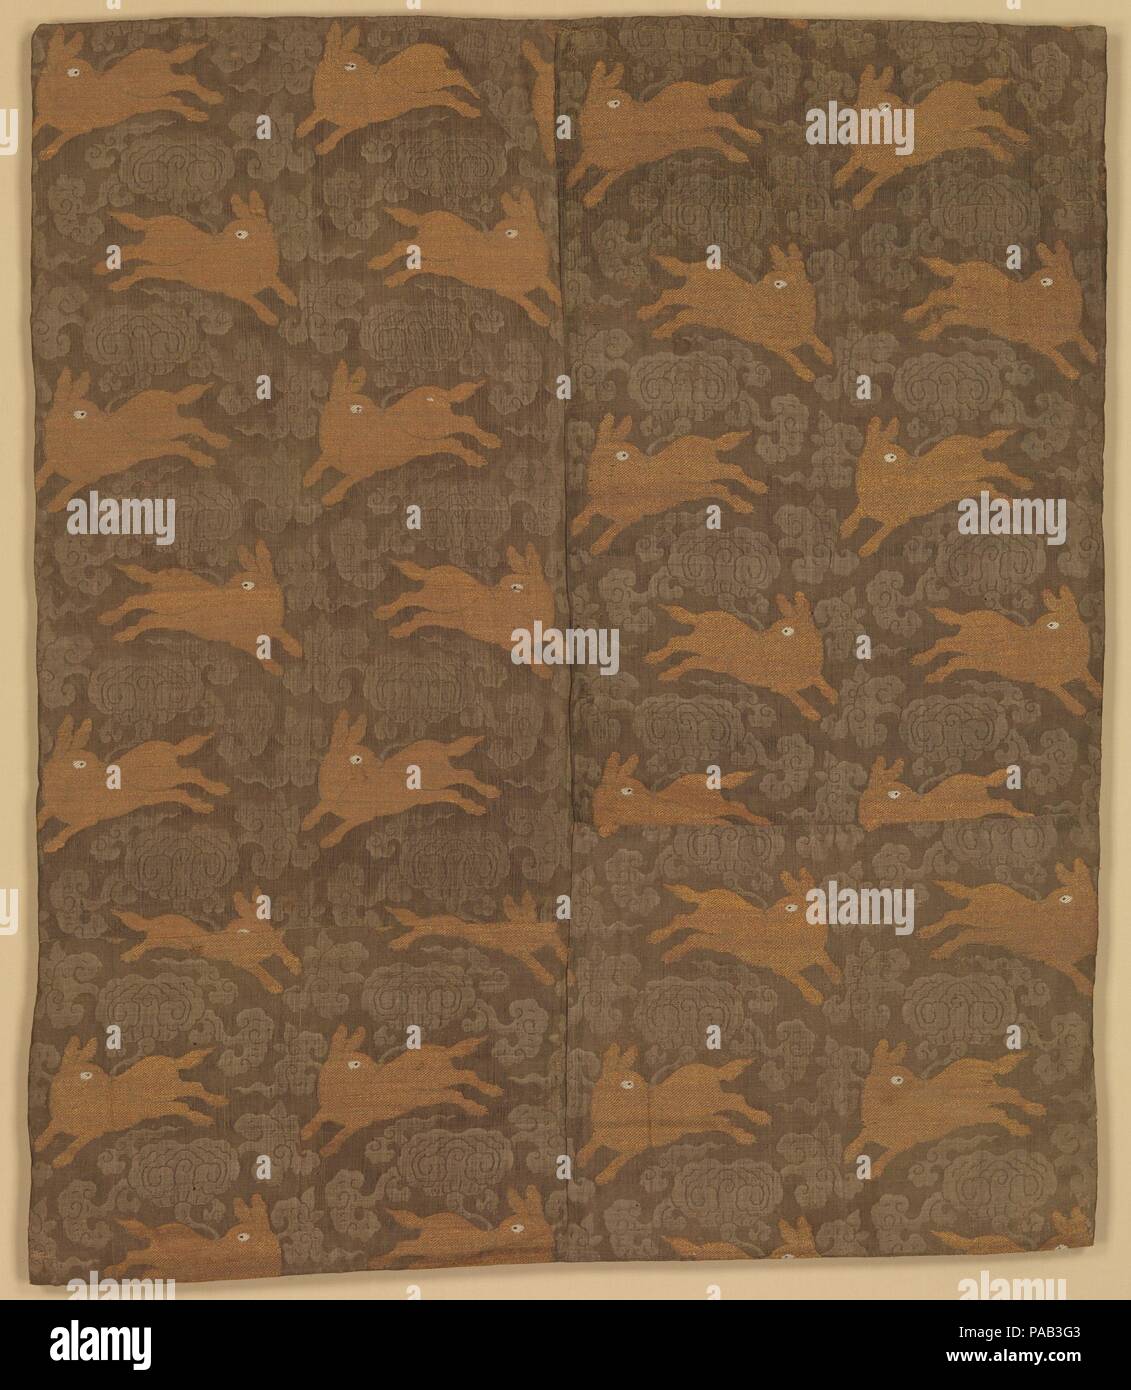 Panel with Rabbits amid Clouds. Culture: China. Dimensions: 40 1/2 x 33 1/2 in. (102.9 x 85.1 cm). Date: late 16th-early 17th century.  The rabbits running among clouds are intended to symbolize the moon, which is inhabited by rabbits in Chinese tradition. Richly brocaded with gold thread, this textile is both luxurious and auspicious. A similar length of gauze was found at Dangling, the mausoleum of the emperor Wanli (r. 1573-1620) in suburban Beijing, and it seems likely that this piece dates from the same period. Museum: Metropolitan Museum of Art, New York, USA. Stock Photo